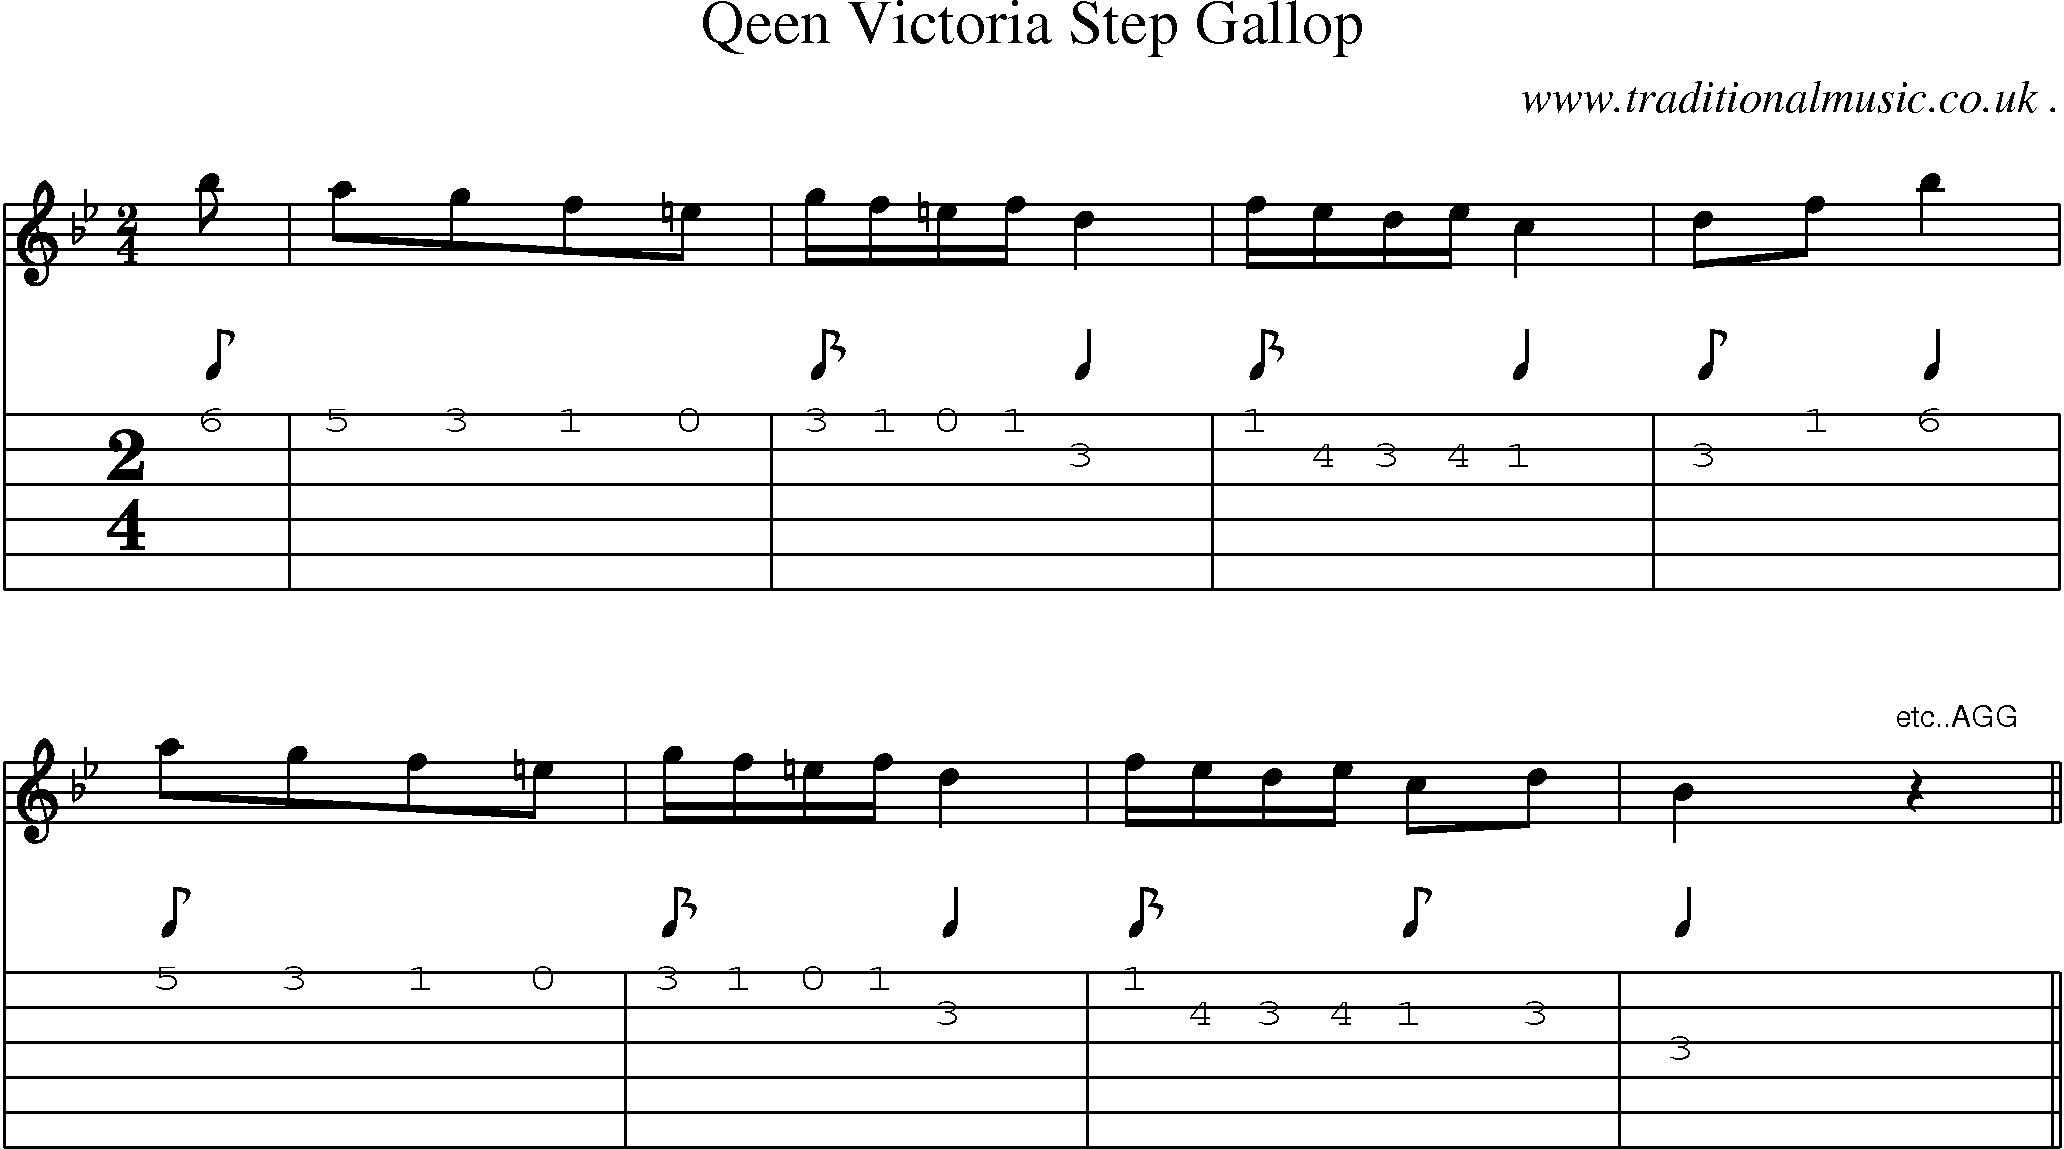 Sheet-Music and Guitar Tabs for Qeen Victoria Step Gallop